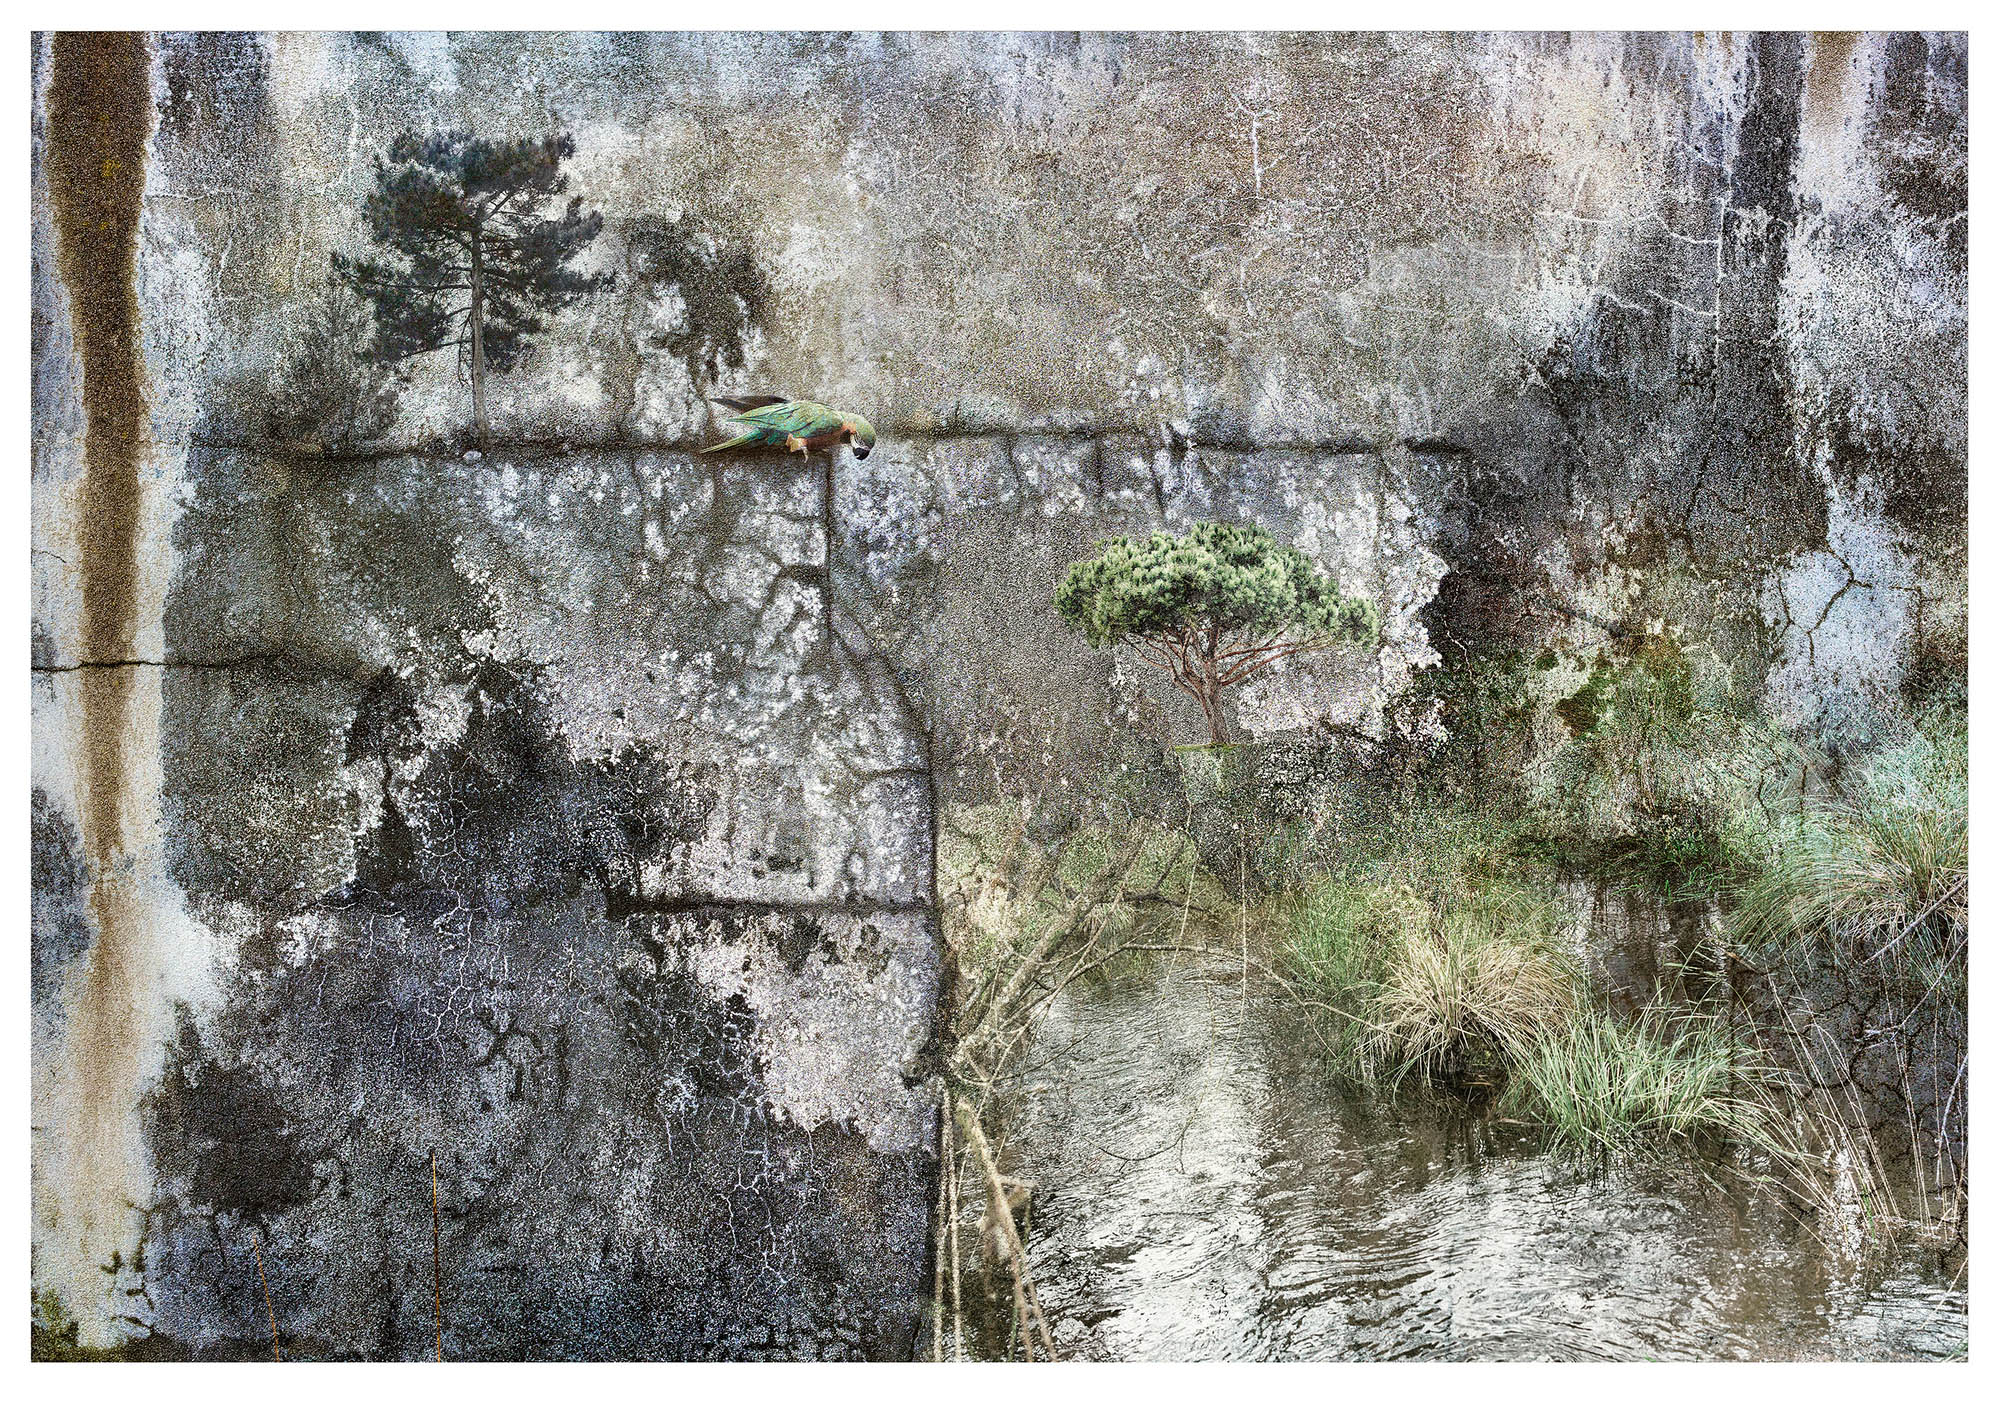 Composite photograph of distressed wall, trees and a stream to form a surrreal landscape of cliffs formimg a canyon